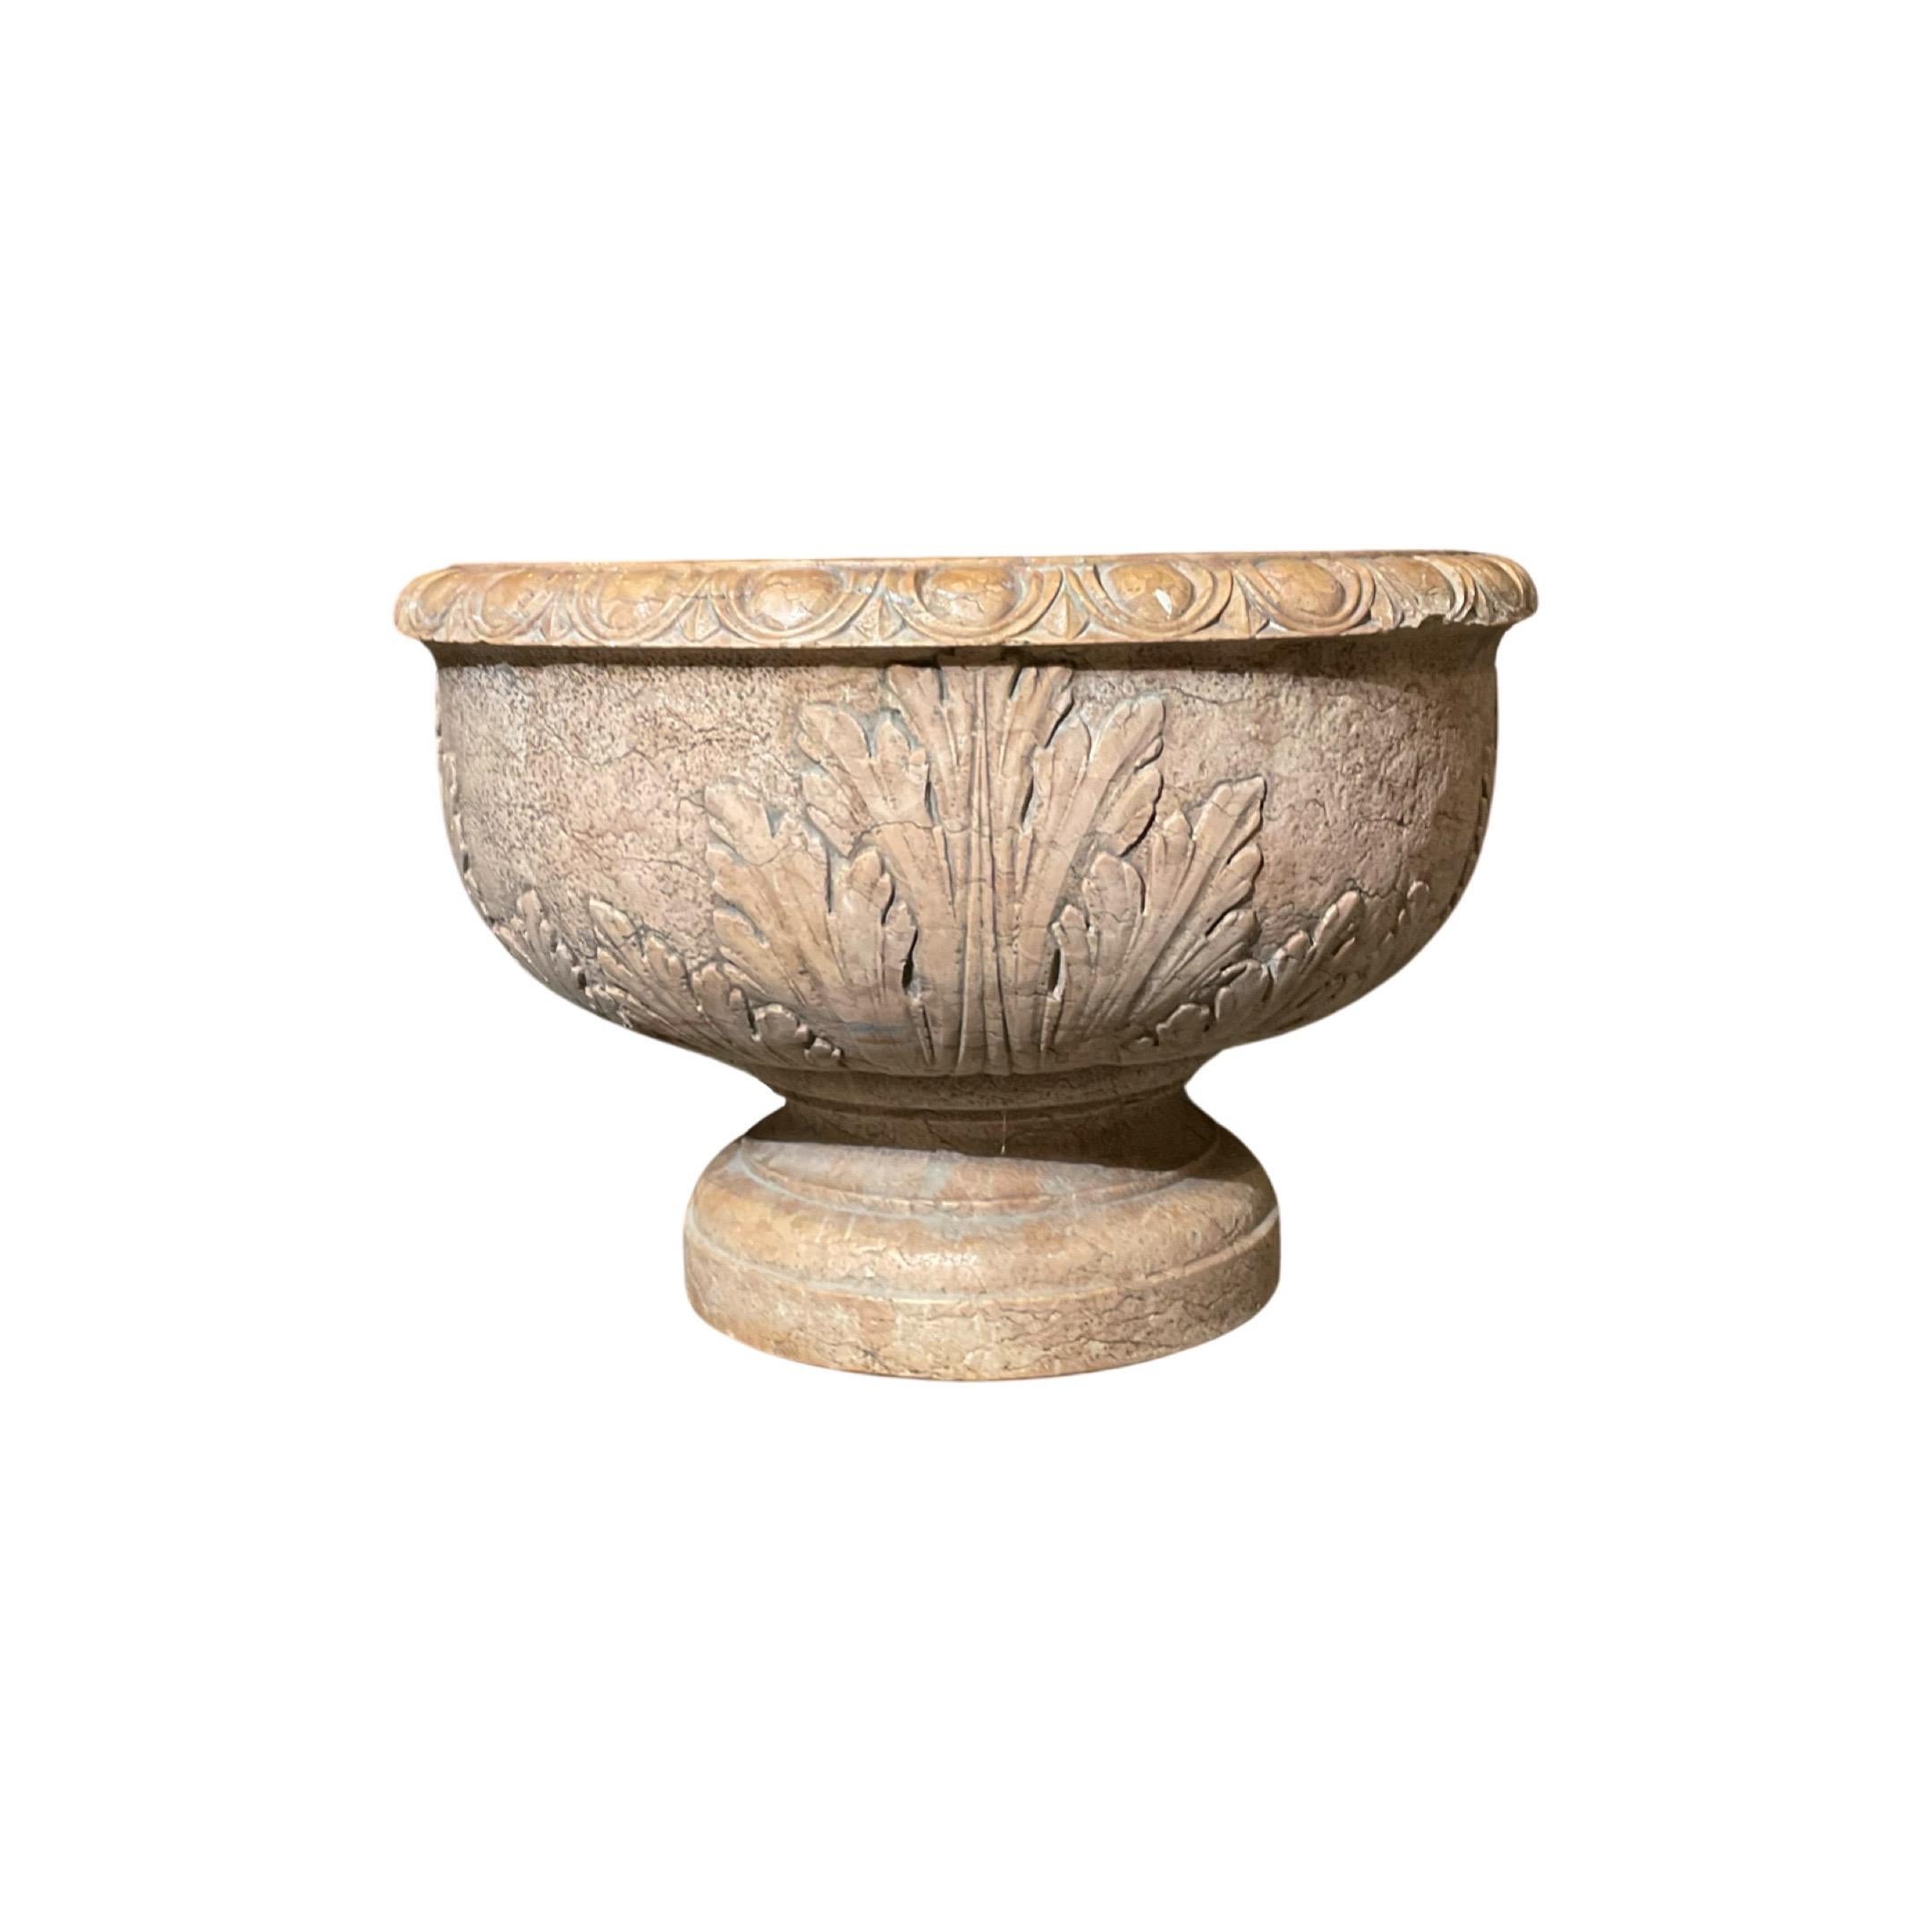 These Italian Verona Marble Planters are from the 18th century and expertly crafted from the highest quality Italian Verona marble. 